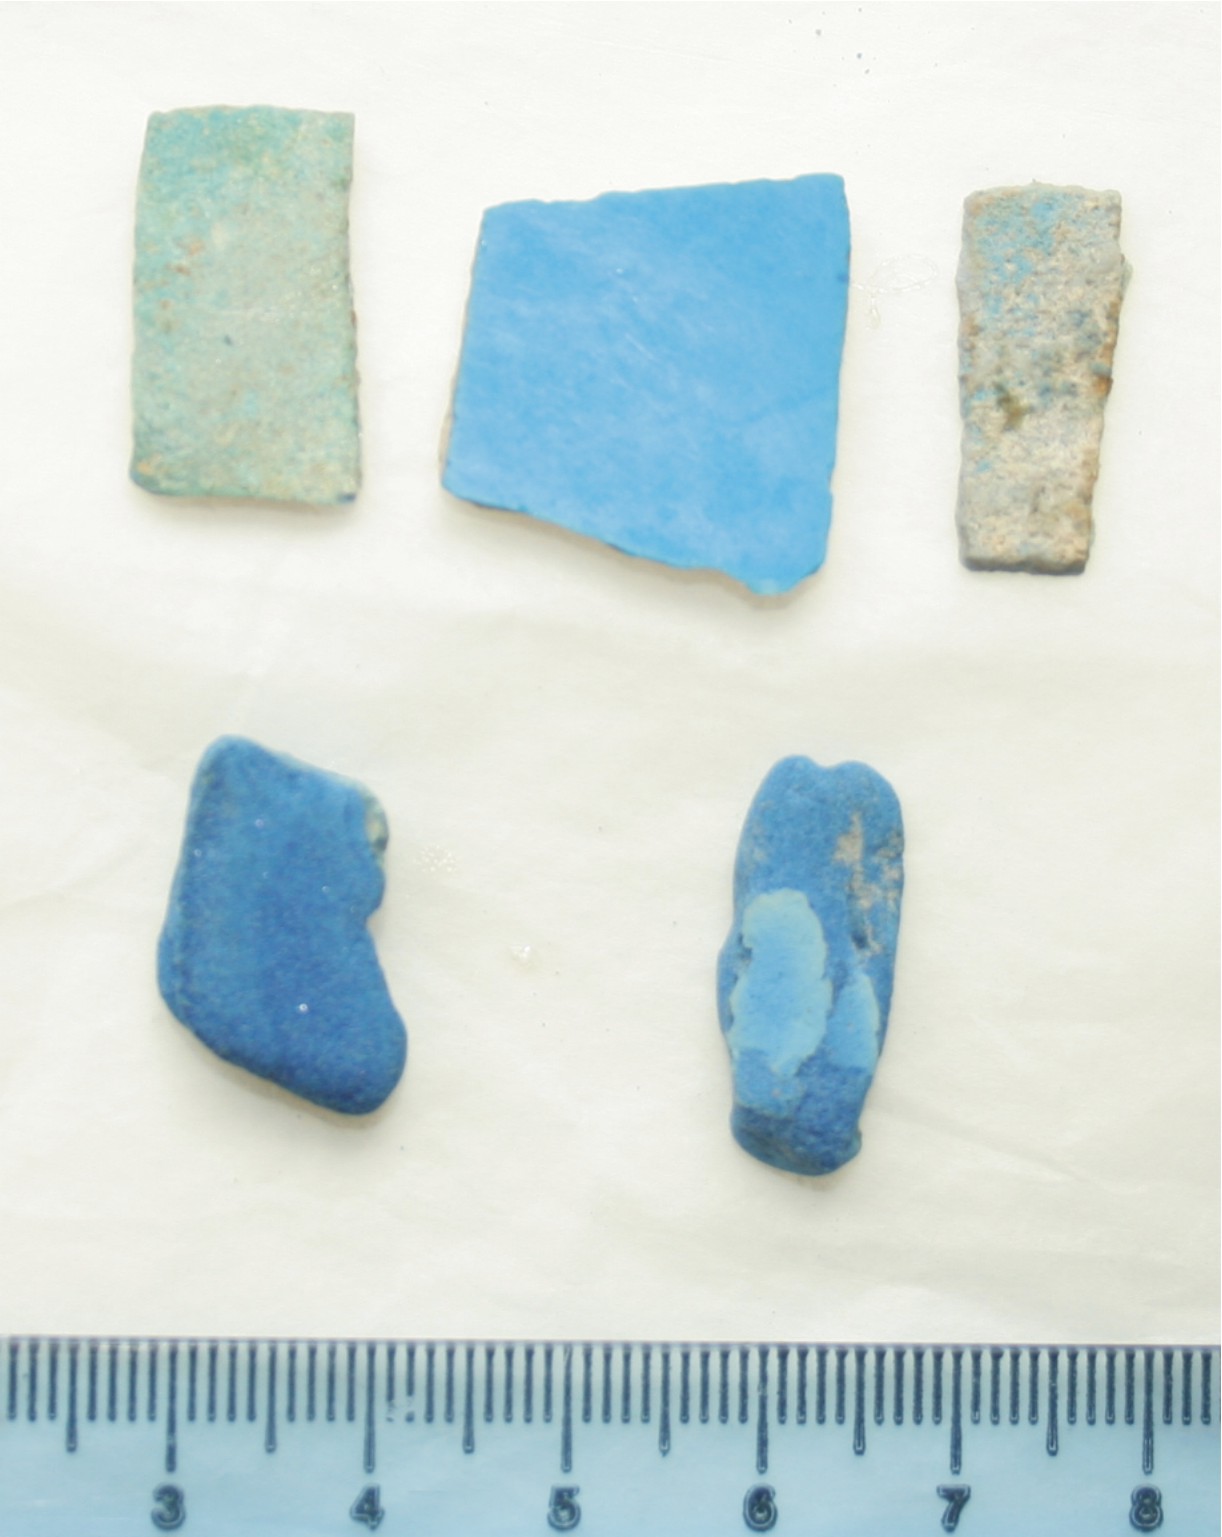 Image for: Fragments of faience